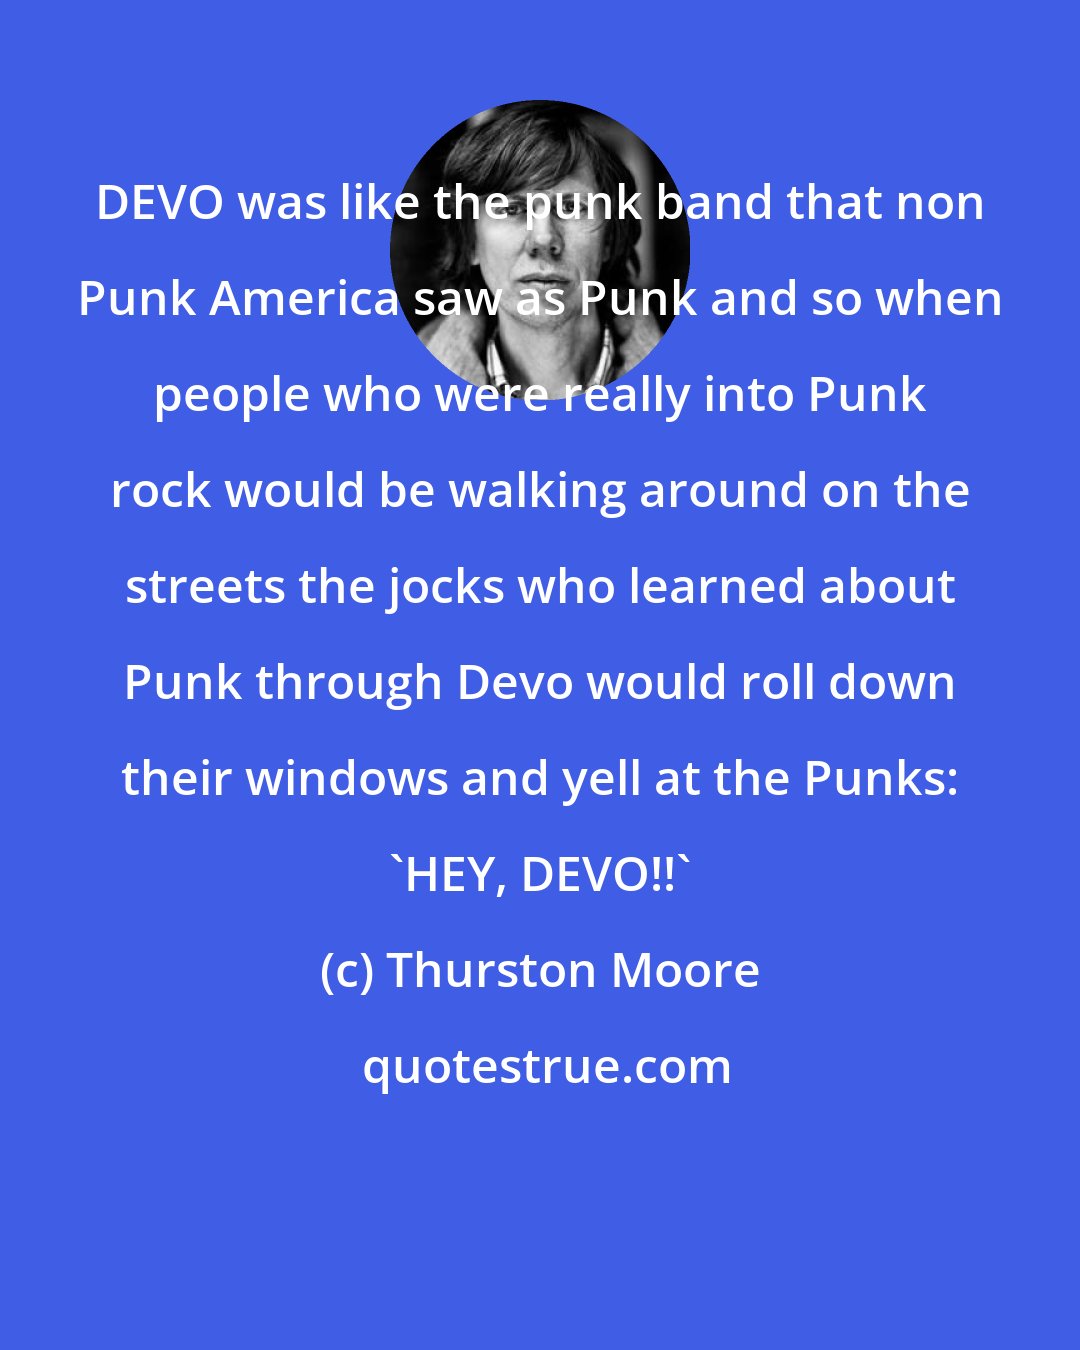 Thurston Moore: DEVO was like the punk band that non Punk America saw as Punk and so when people who were really into Punk rock would be walking around on the streets the jocks who learned about Punk through Devo would roll down their windows and yell at the Punks: 'HEY, DEVO!!'